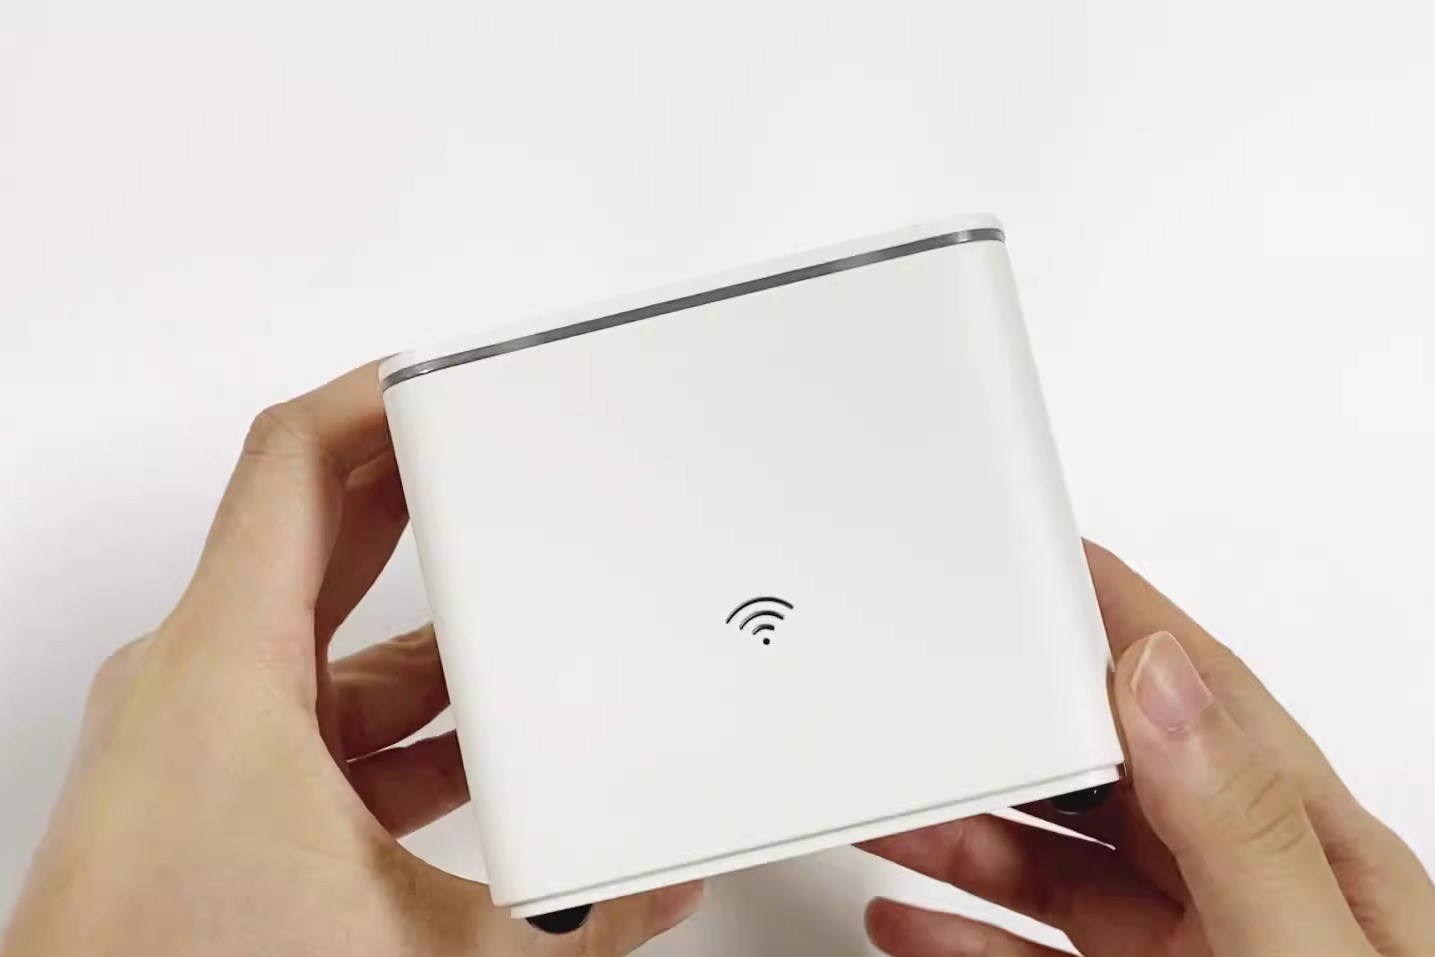 Connecting SIM Card To WiFi Router: Step-by-Step Guide